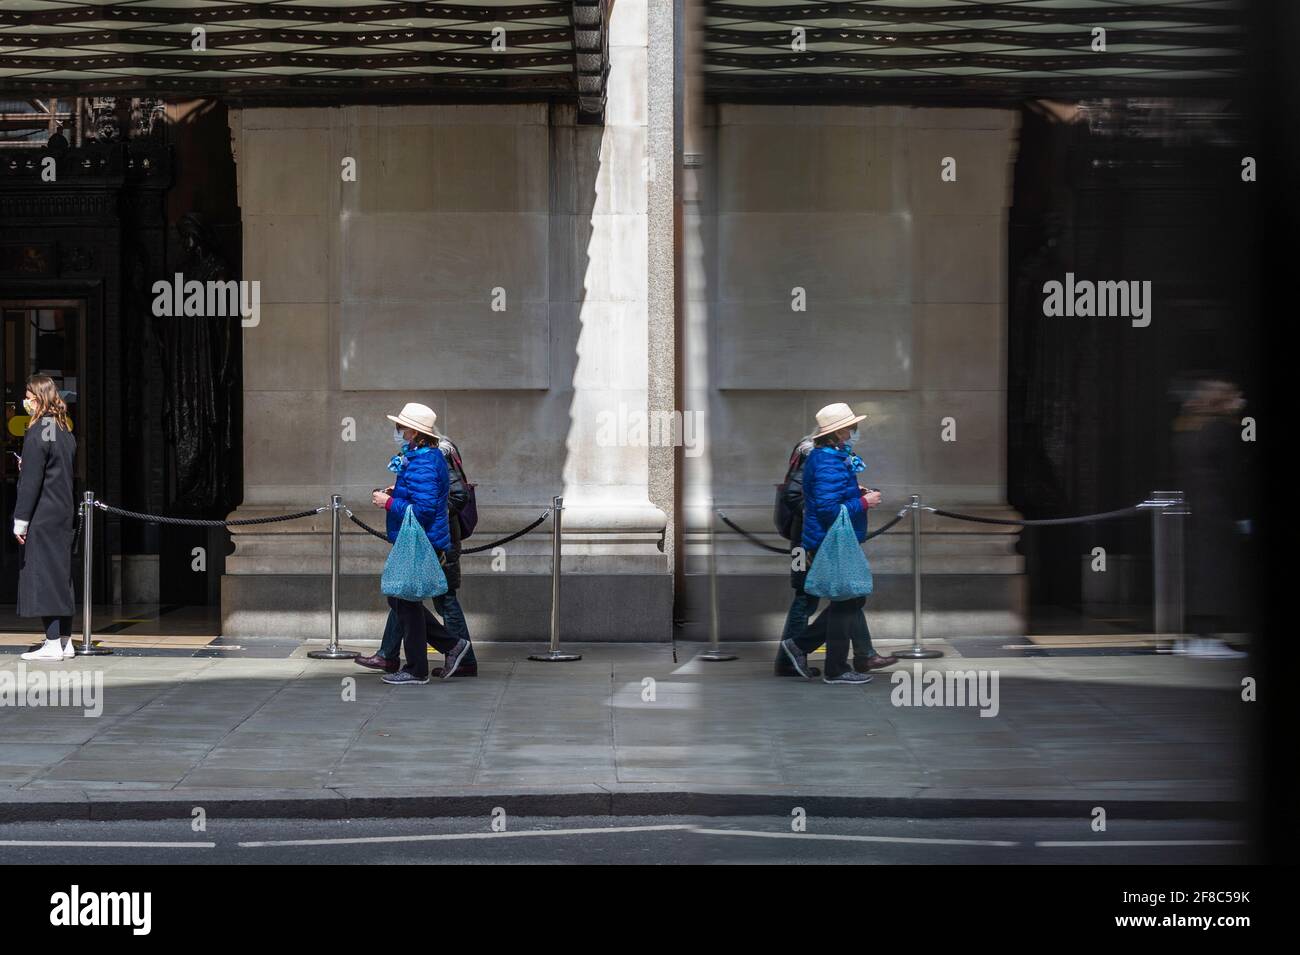 London, UK. 13 April 2021.  People shopping in Oxford Street following the UK government’s coronavirus roadmap out of lockdown which allowed non-essential shops to reopen the previous day.  Credit: Stephen Chung / Alamy Live News Stock Photo